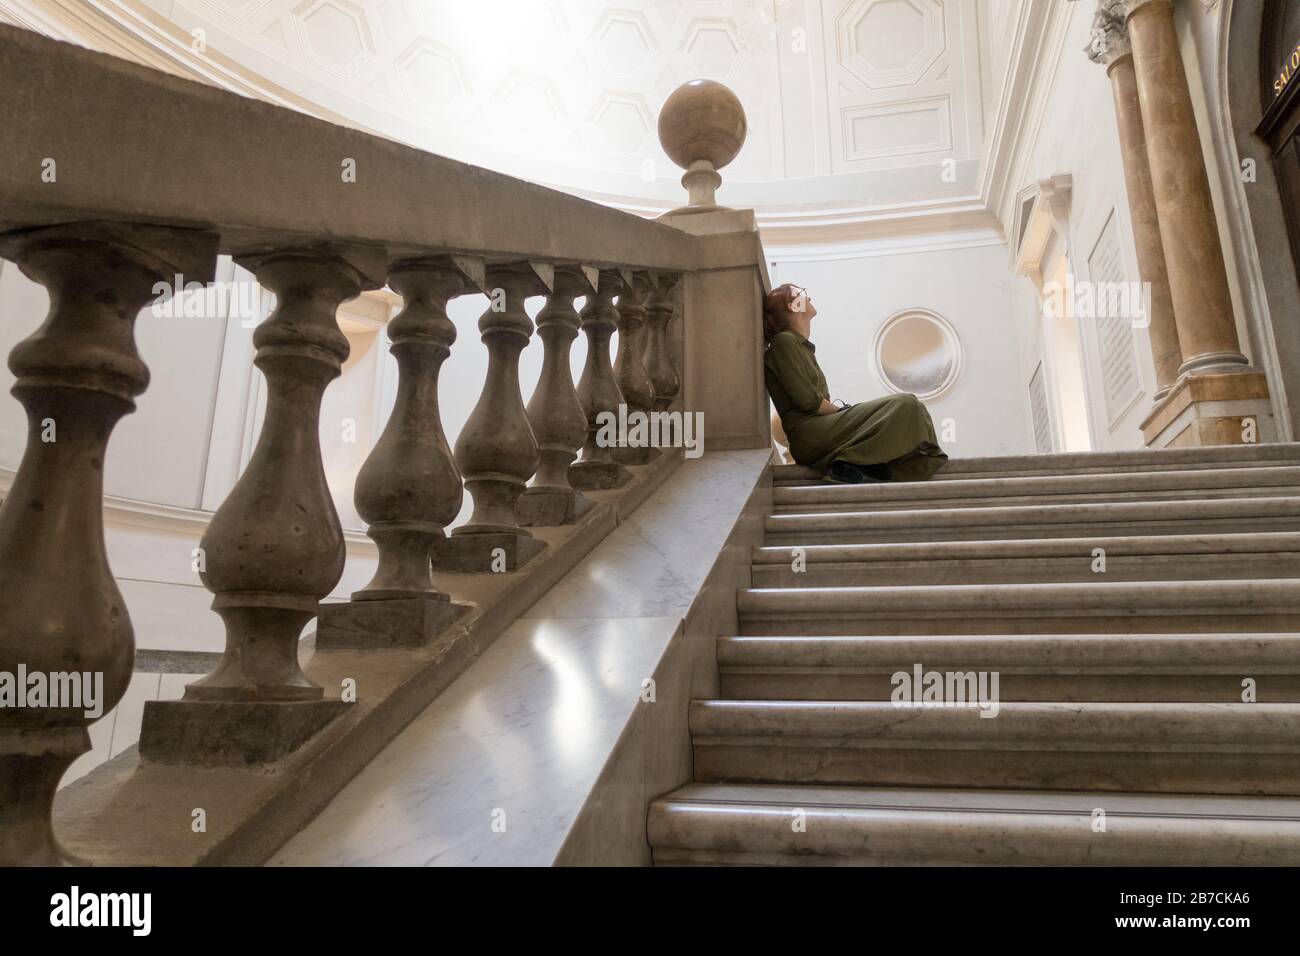 A woman resting at the top of the grand staircase at the National Archeological Museum in Naples, Italy. Stock Photo